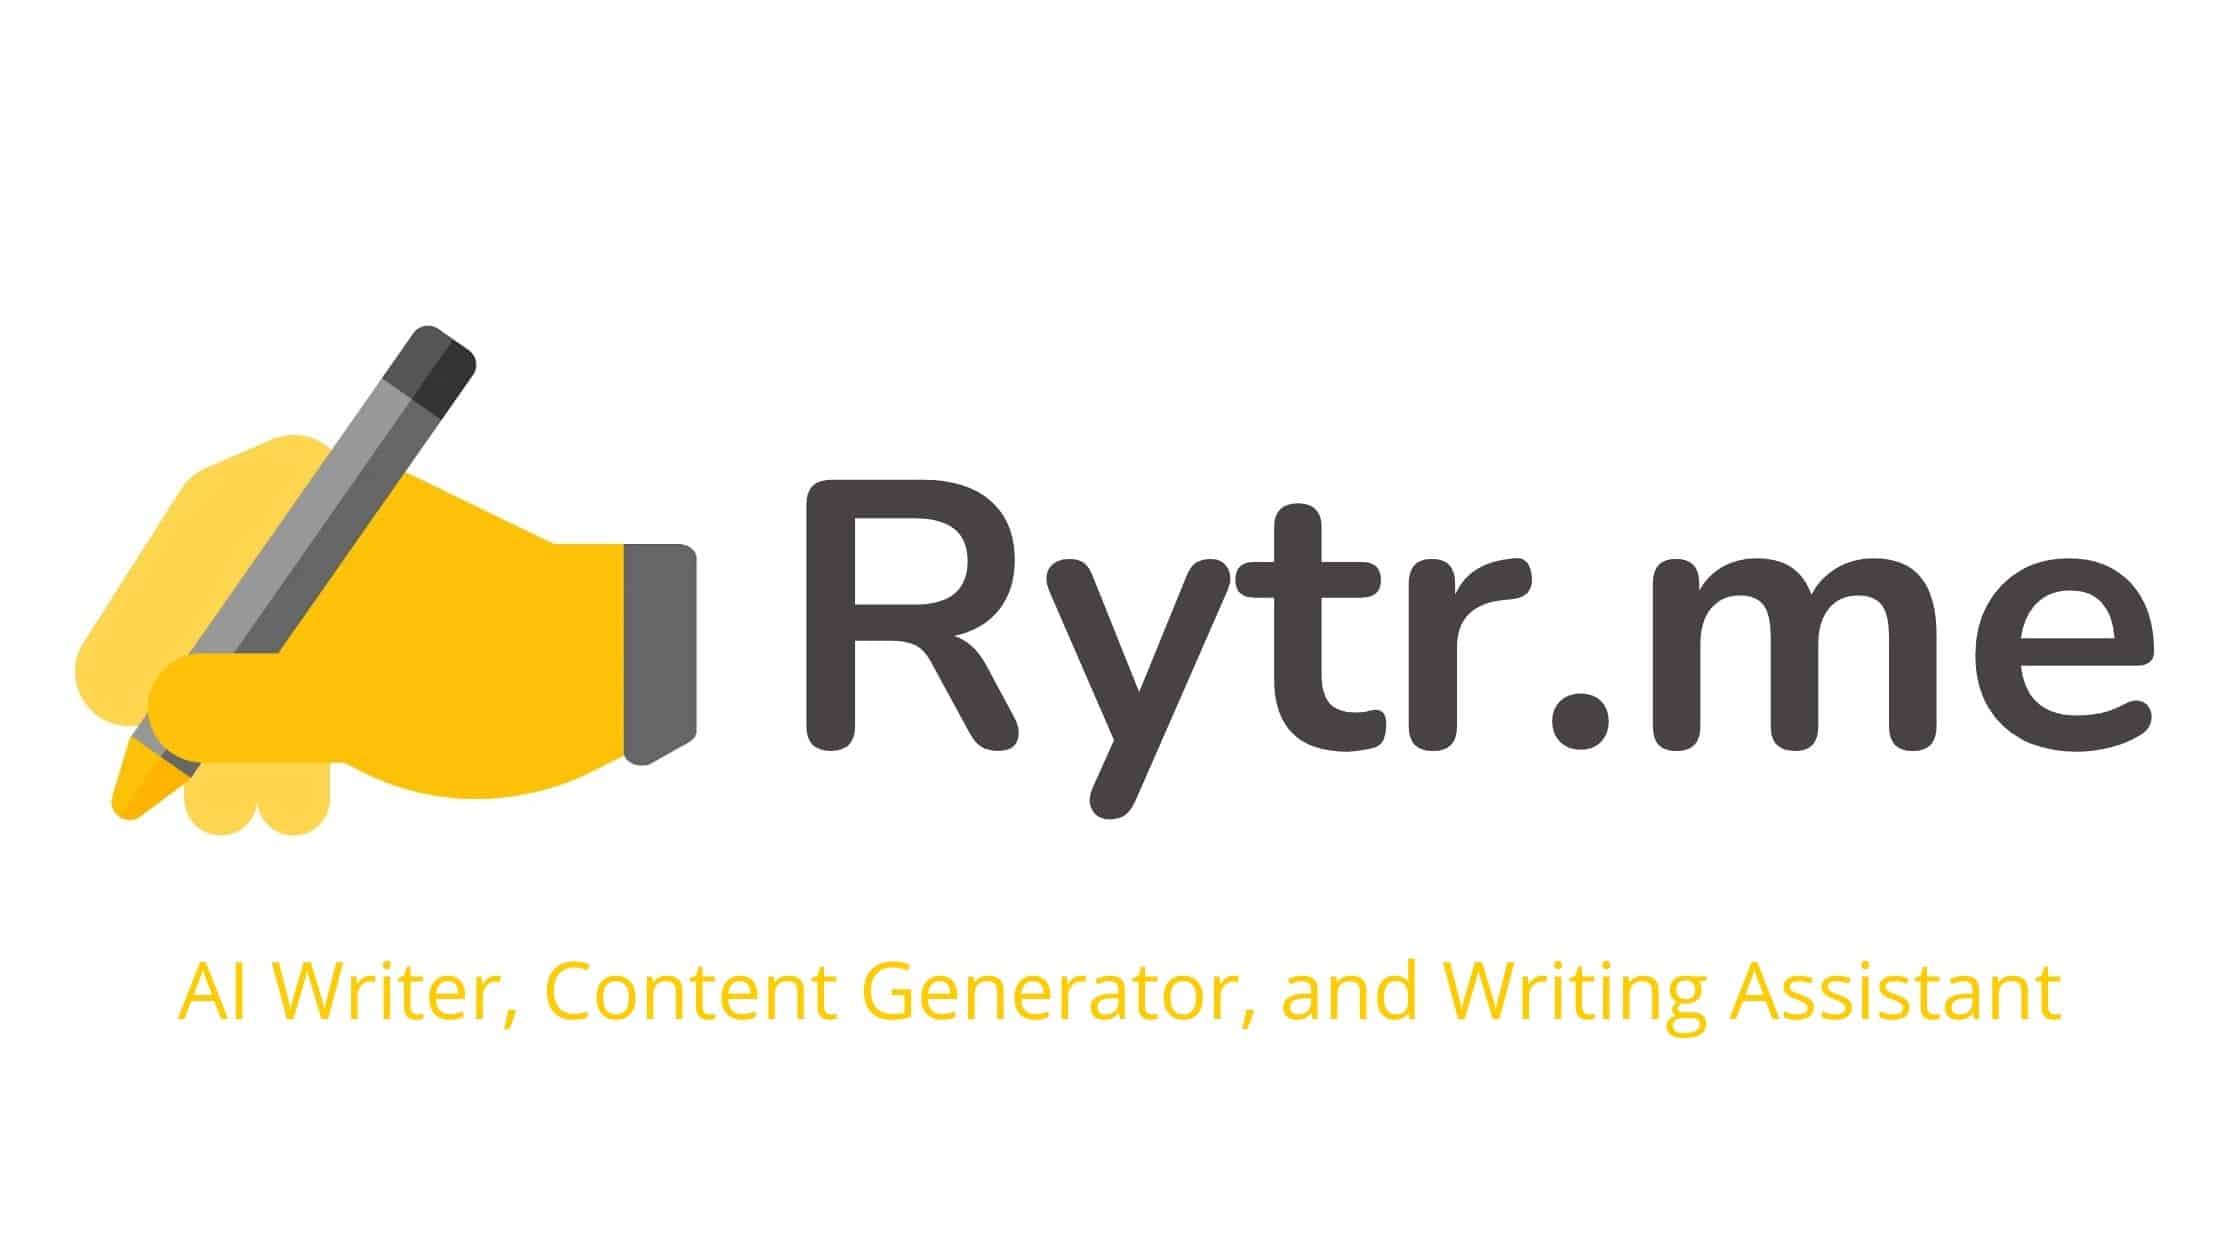 Rytr Coupon Code